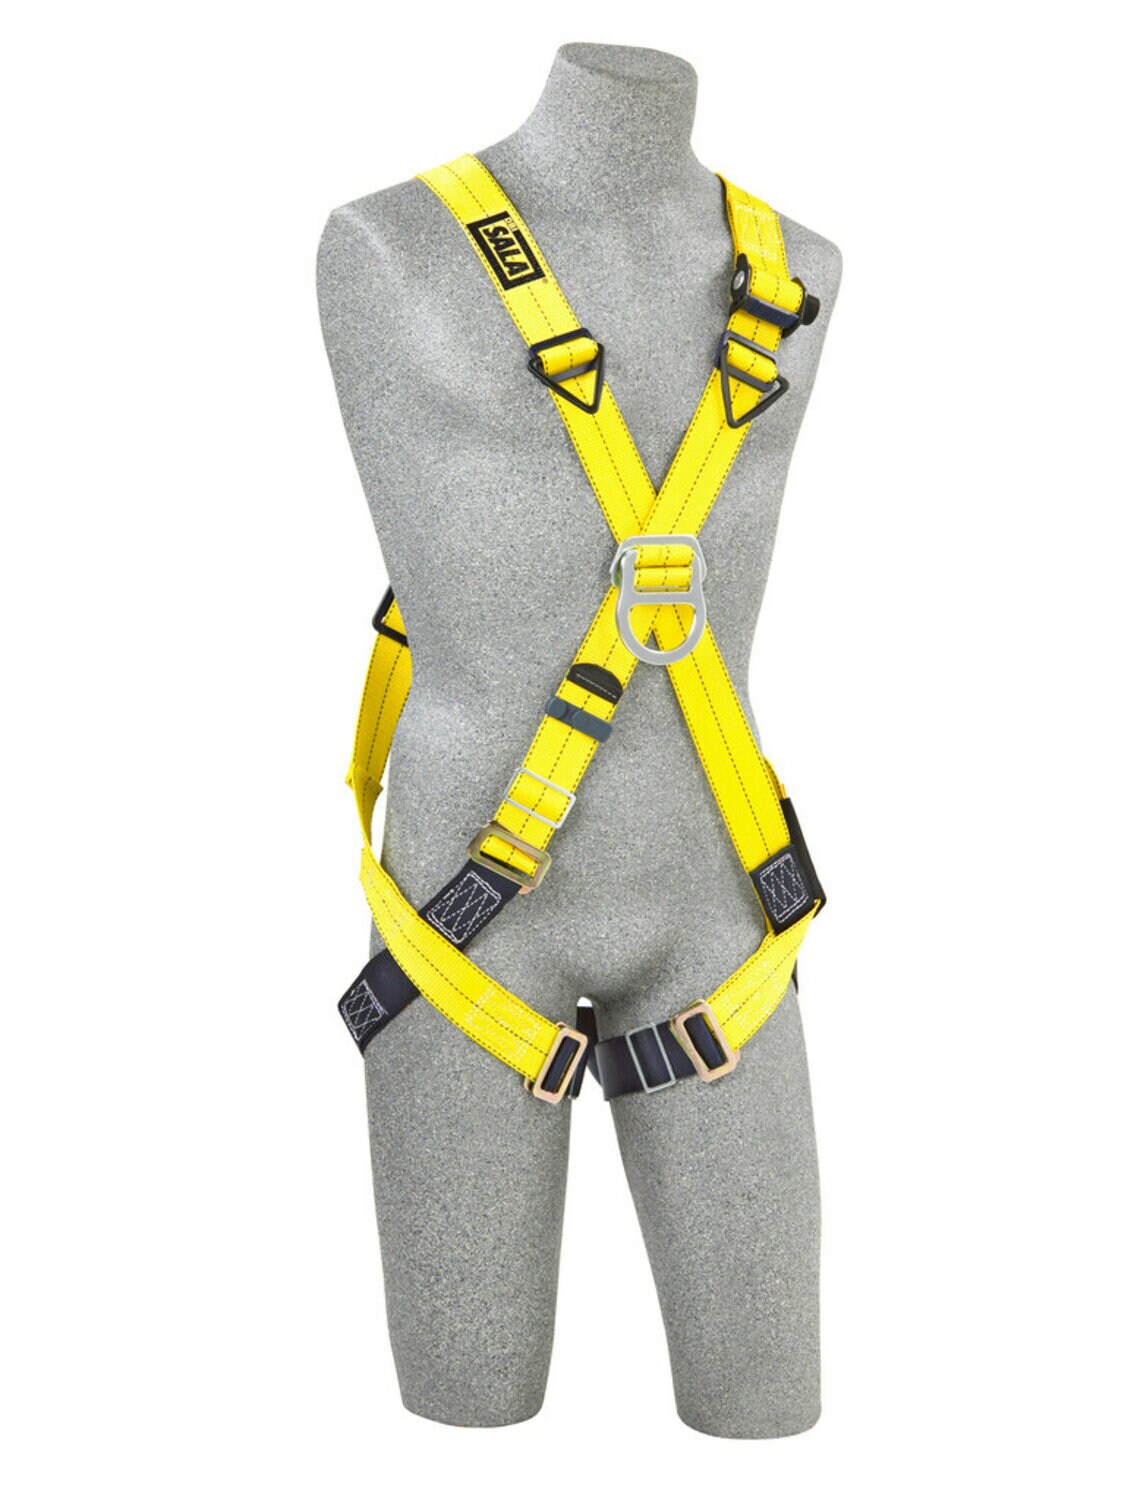 7012815300 - 3M DBI-SALA Delta Cross-Over Climbing Safety Harness 1101855, X-Large